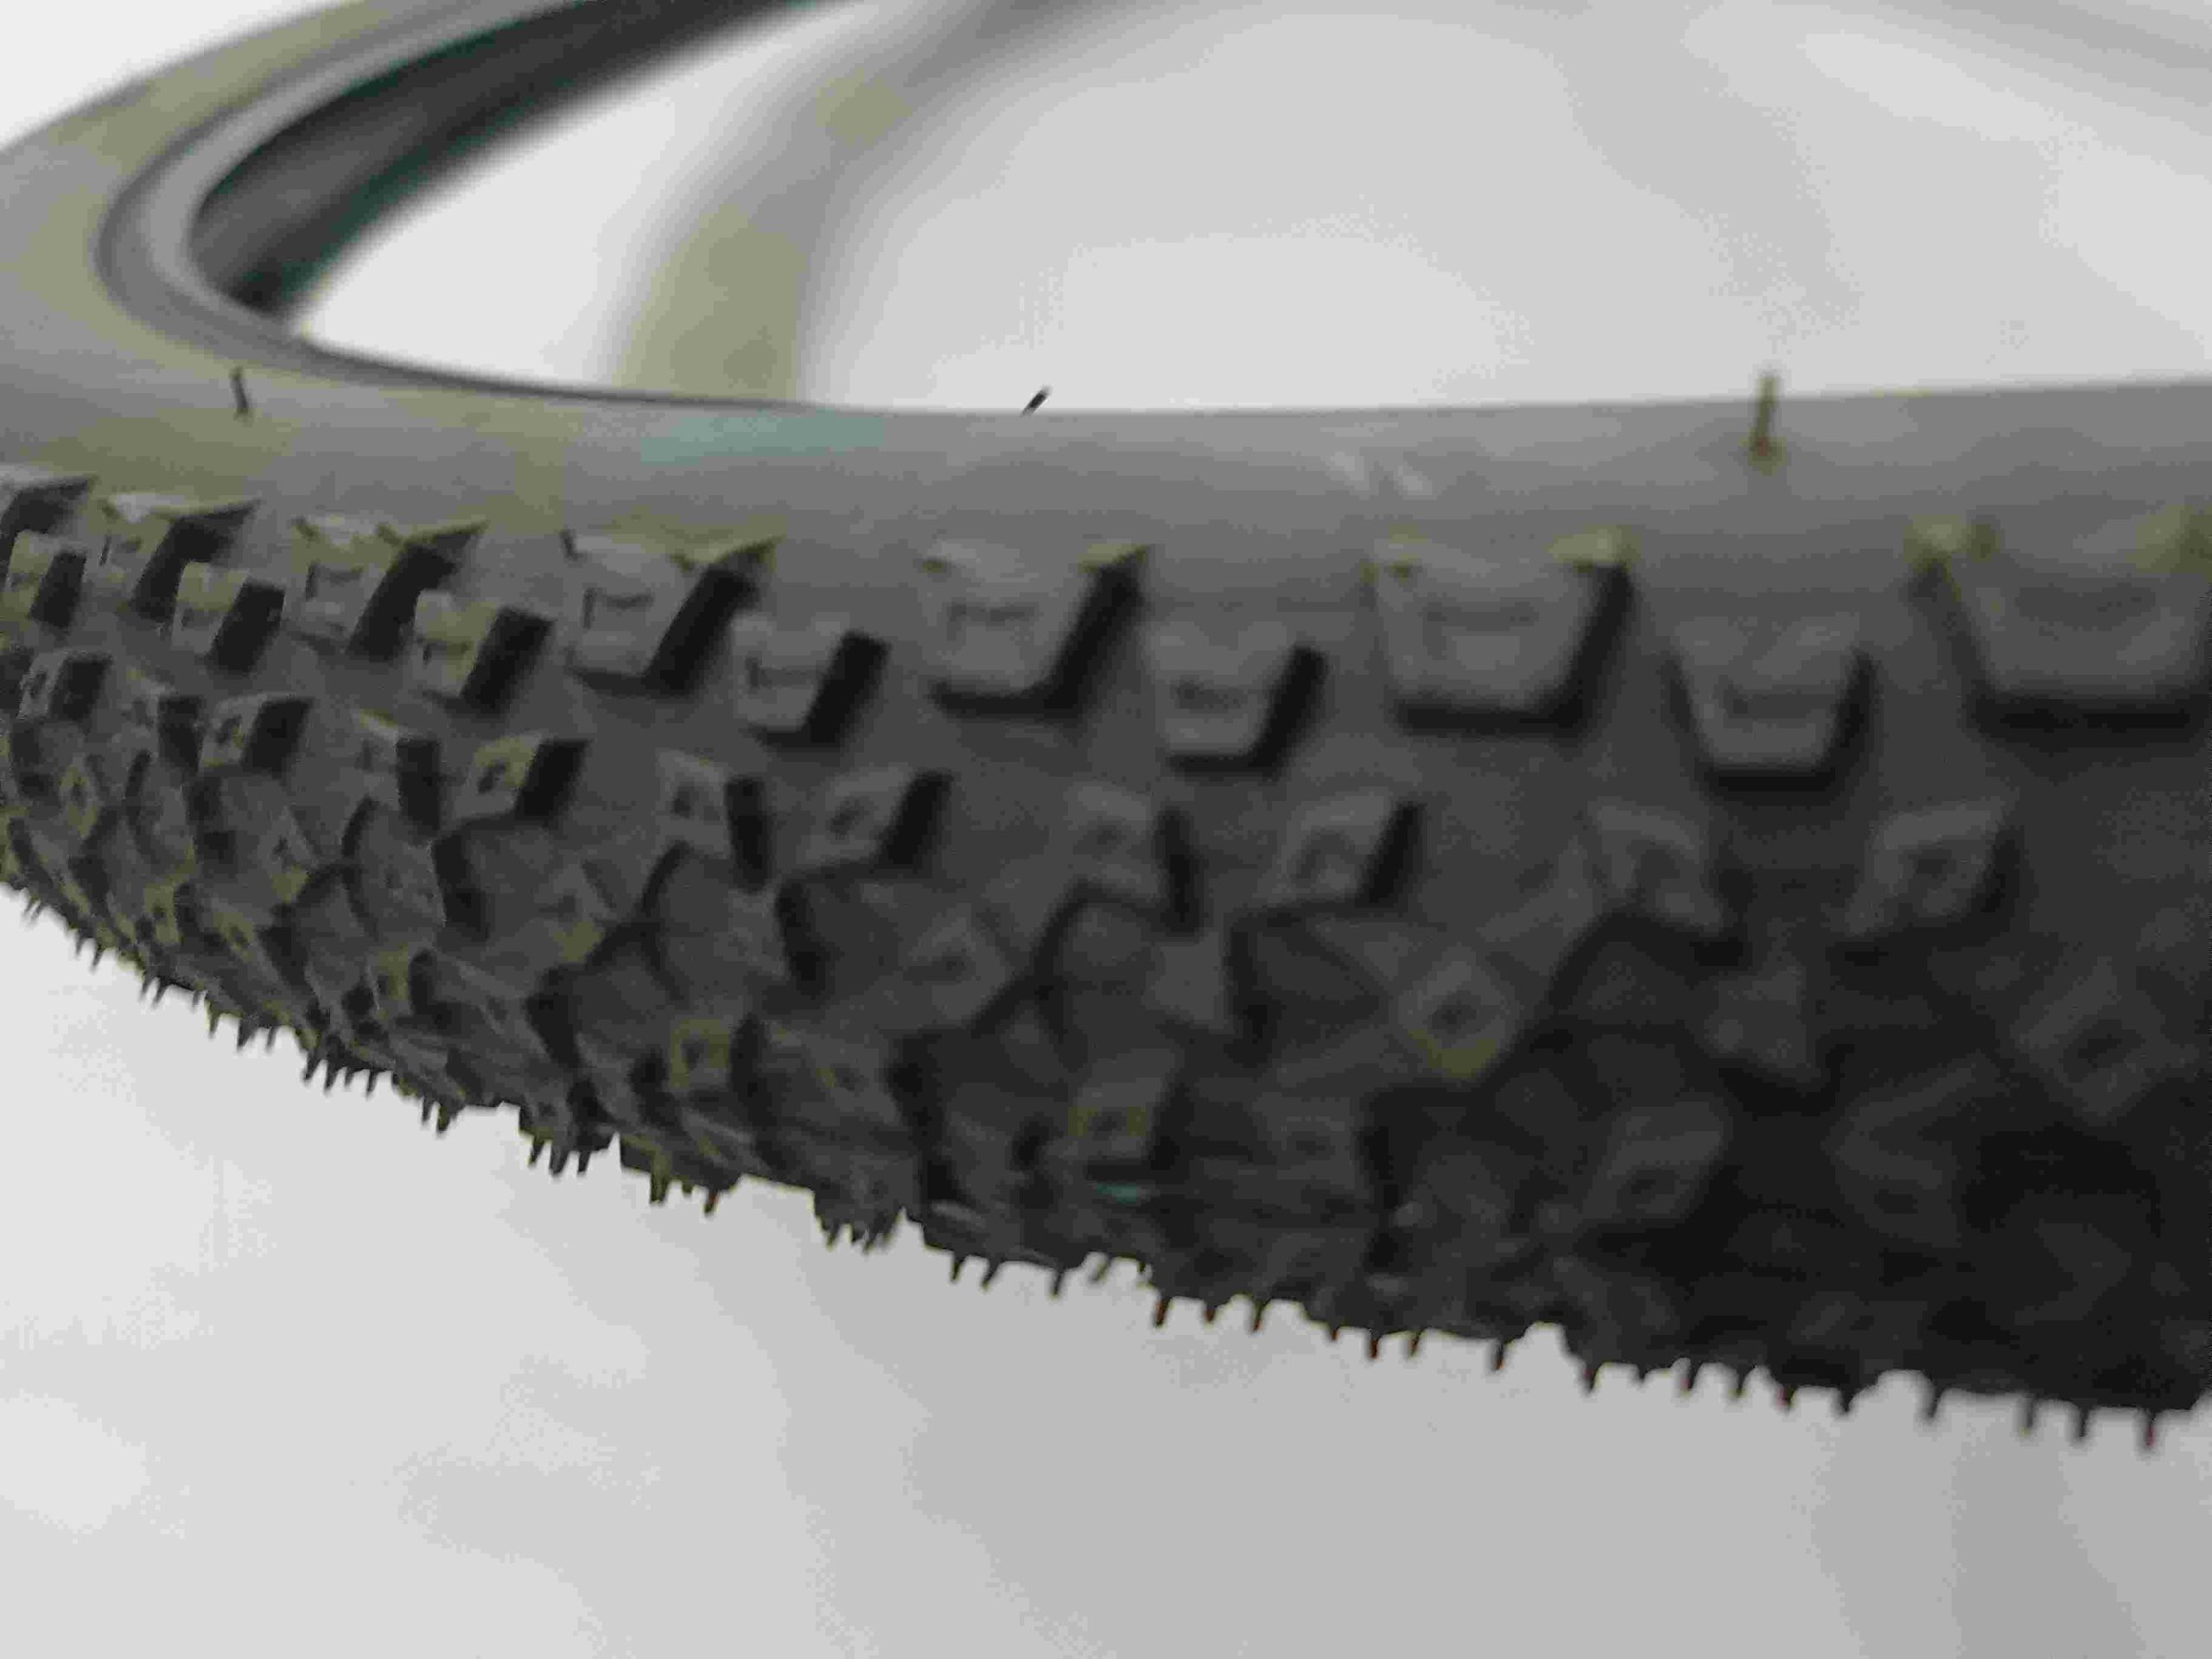 HOTEBIKE Bicycle Tires Compatible with 26x1.95 / 27.5x1.95 Bicycle Tires Replacement Bike Tires - HOTEBIKE - 3